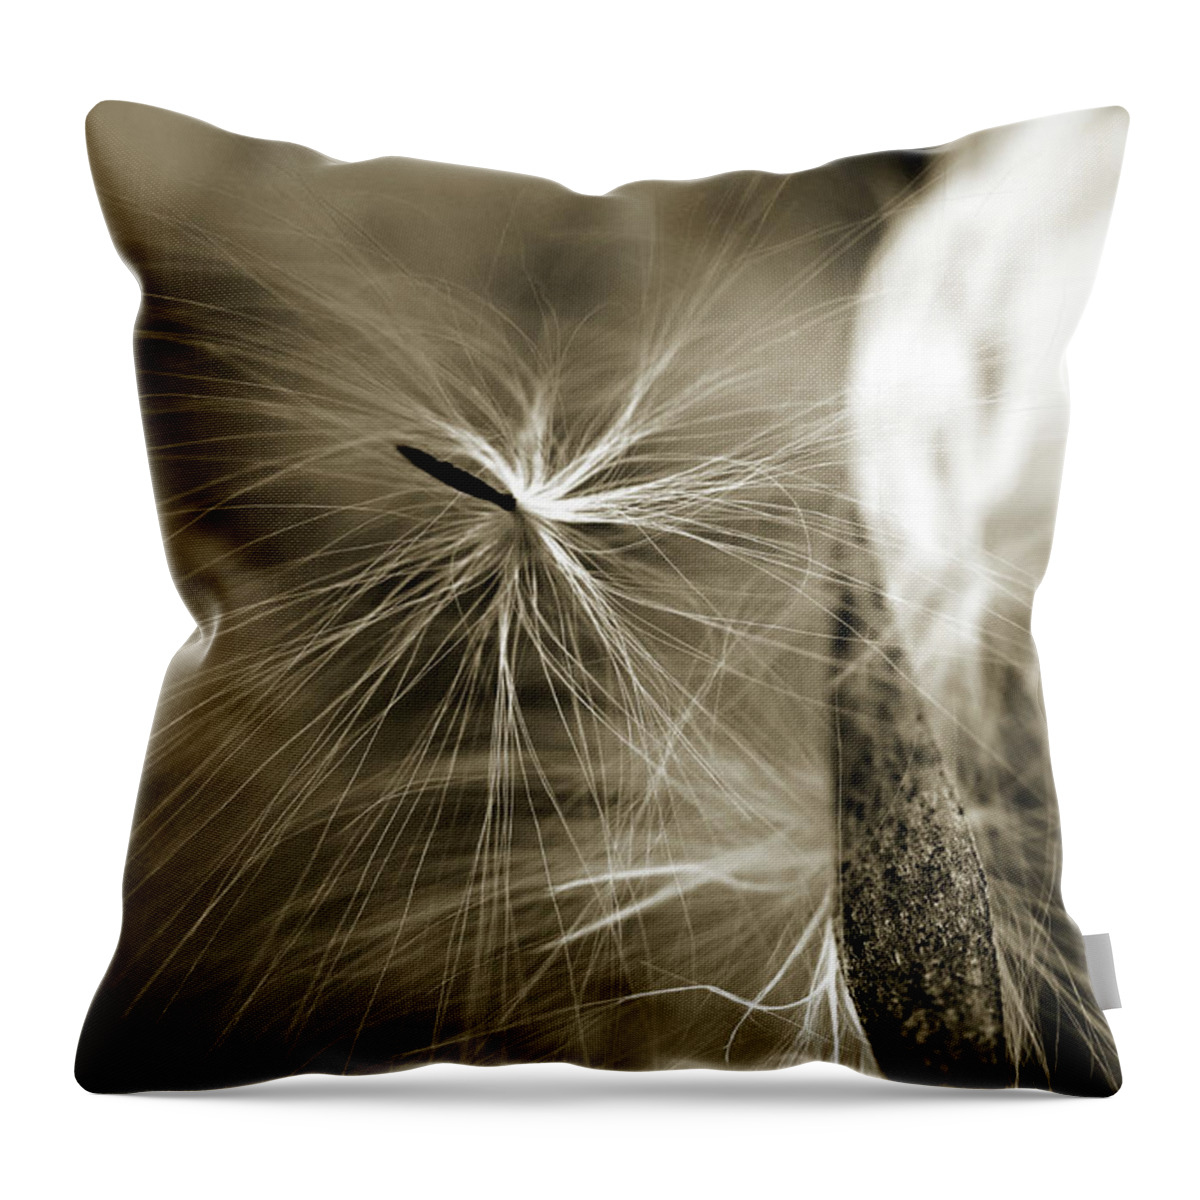 Sepia Throw Pillow featuring the photograph Almost by Michelle Wermuth